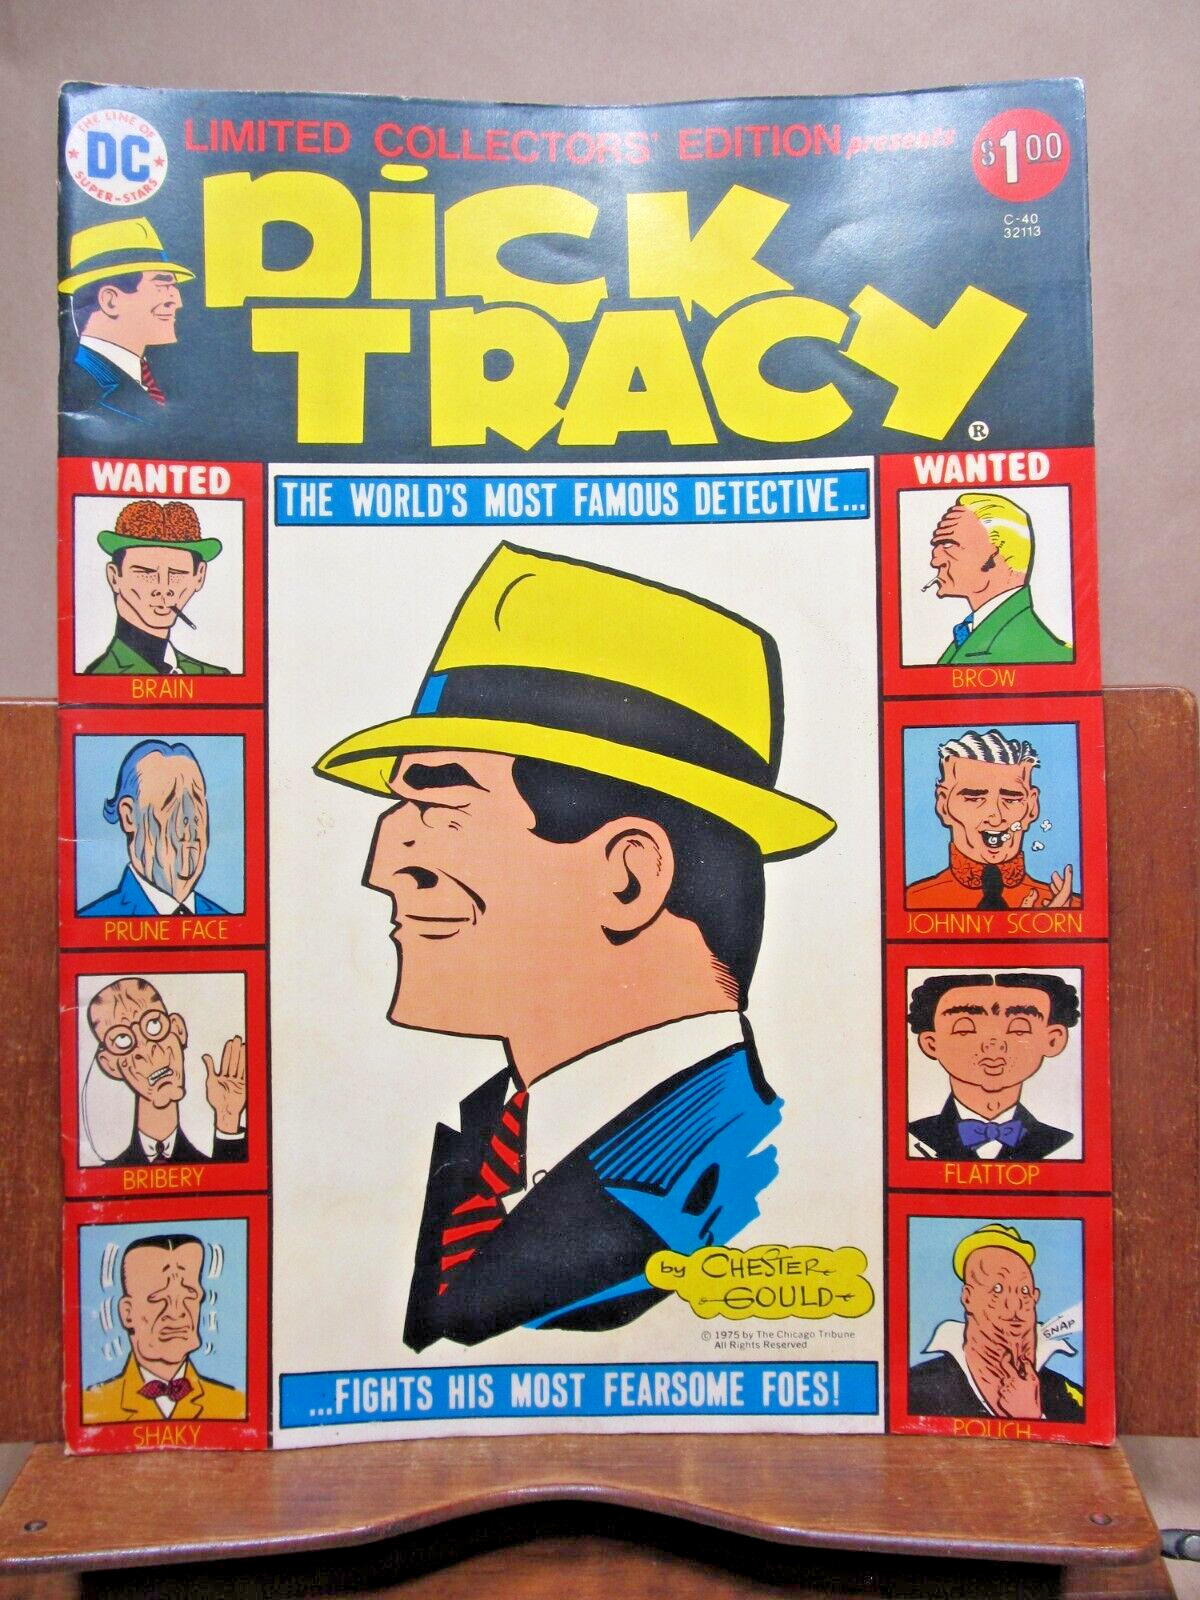 Dick Tracy The World\'s Most Famous Detective 1975 DC Comics Limited Collector\'s